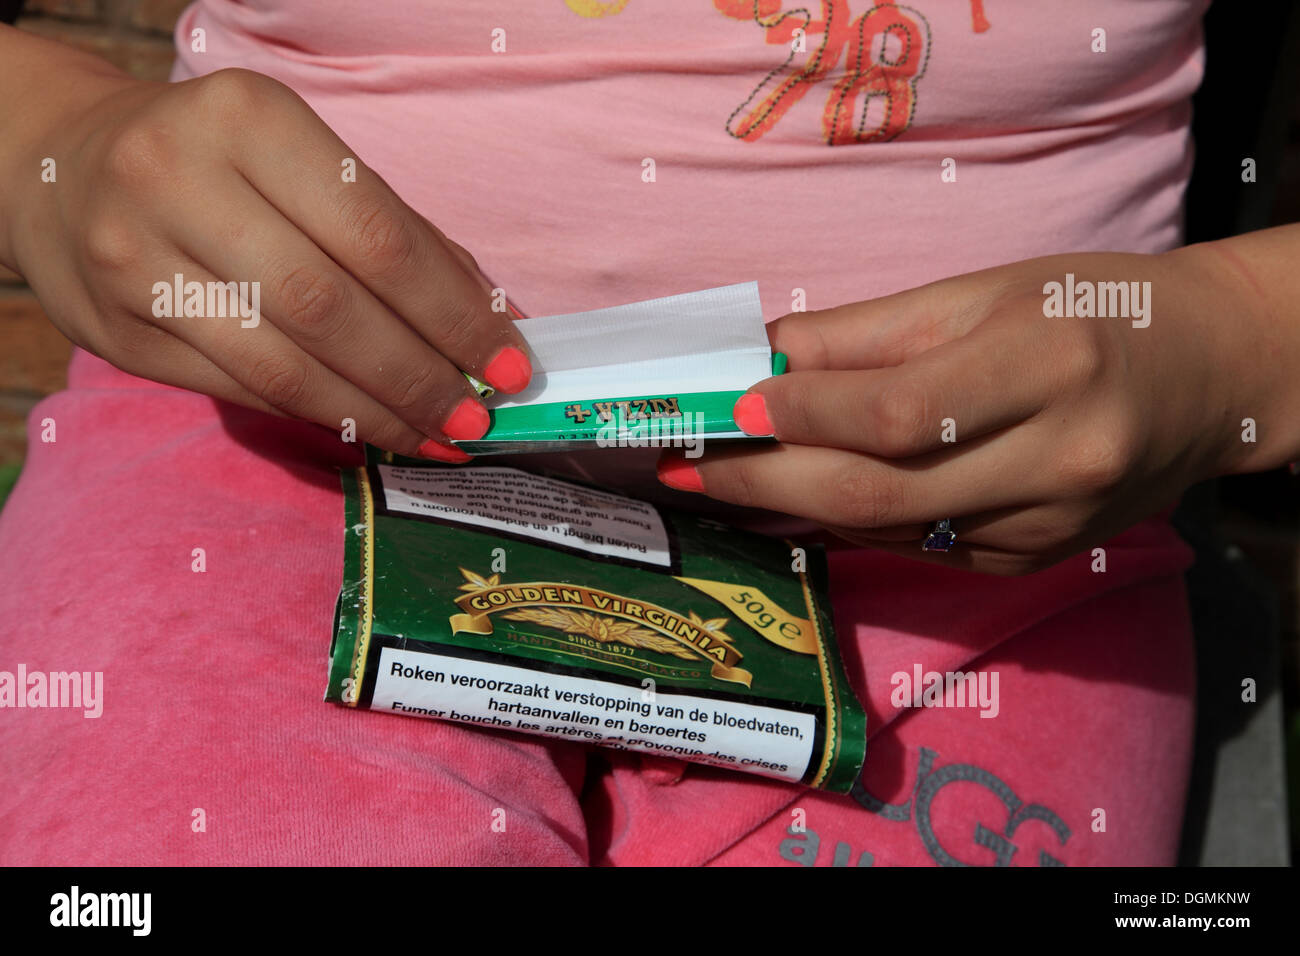 A teenage girl rolling her own cigarette with loose tobacco and rolling paper Stock Photo